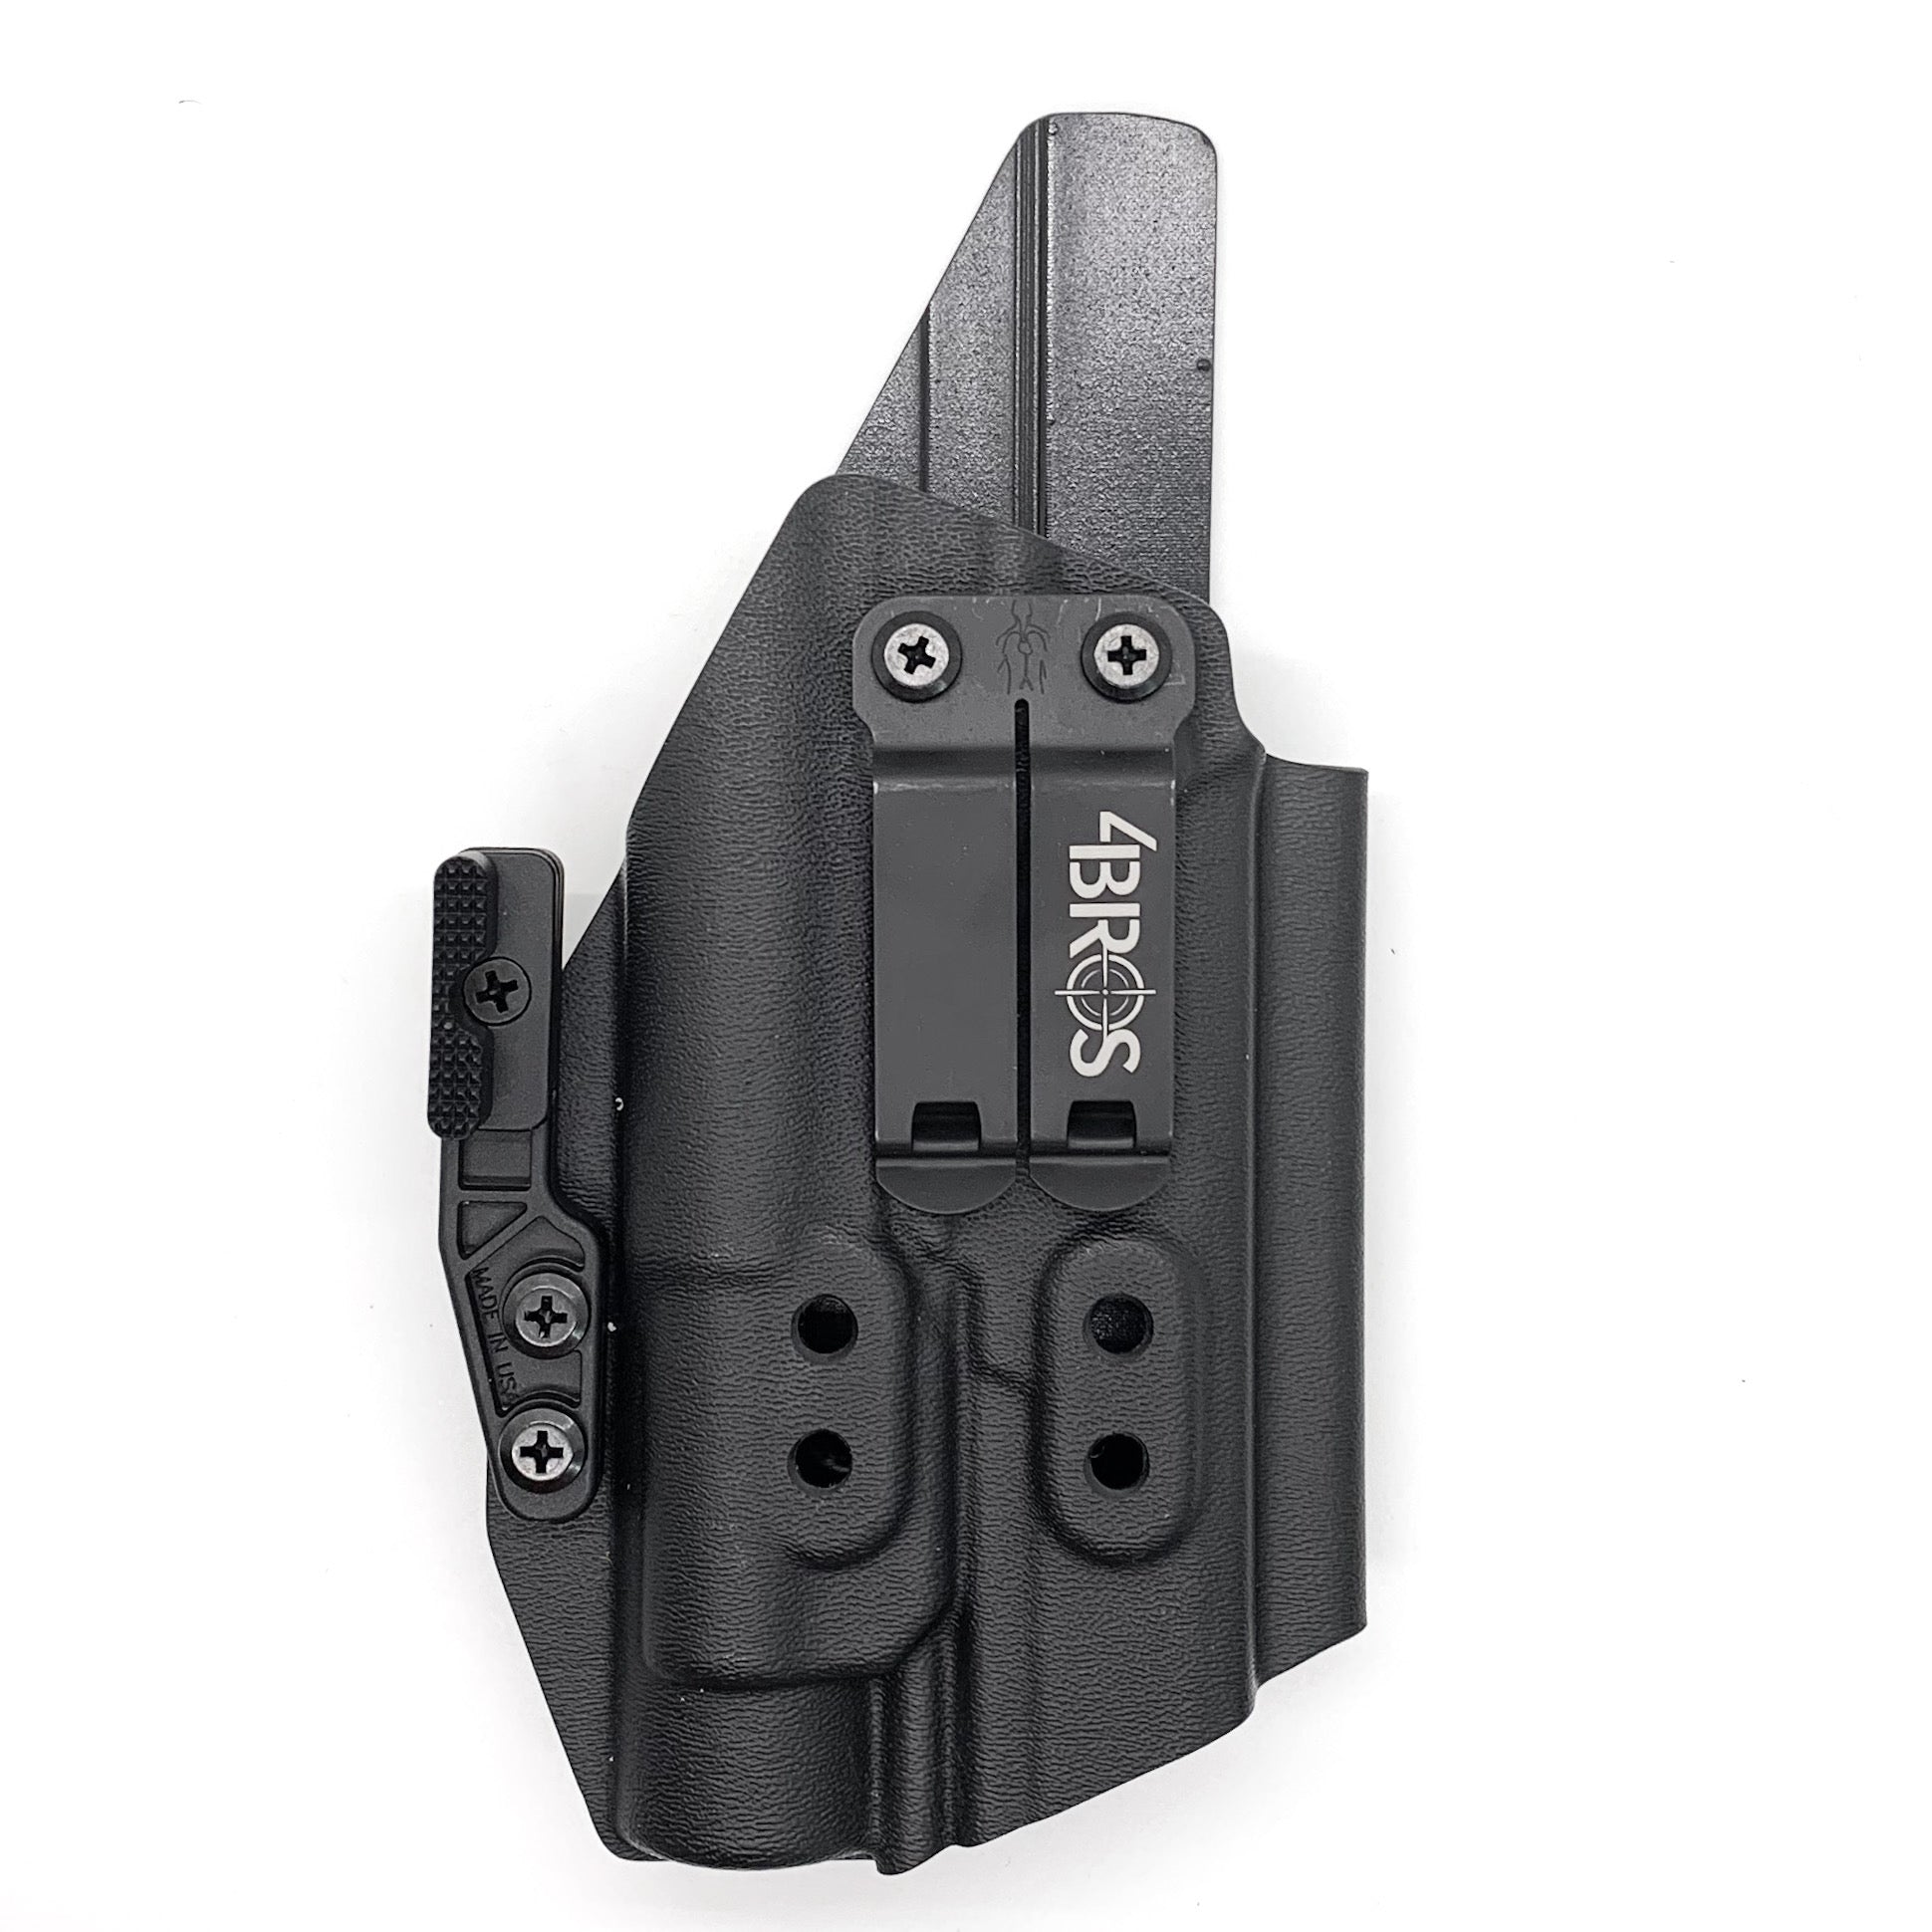 For the best concealed carry Inside Waistband IWB AIWB Holster designed to fit the Walther PDP 4.5" Full-Size pistol with the Streamlight TLR-1 or TLR-1HL mounted on the firearm, shop Four Brothers Holsters. Cut for red dot sight, full sweat guard, adjustable retention & open muzzle for threaded barrels & compensators